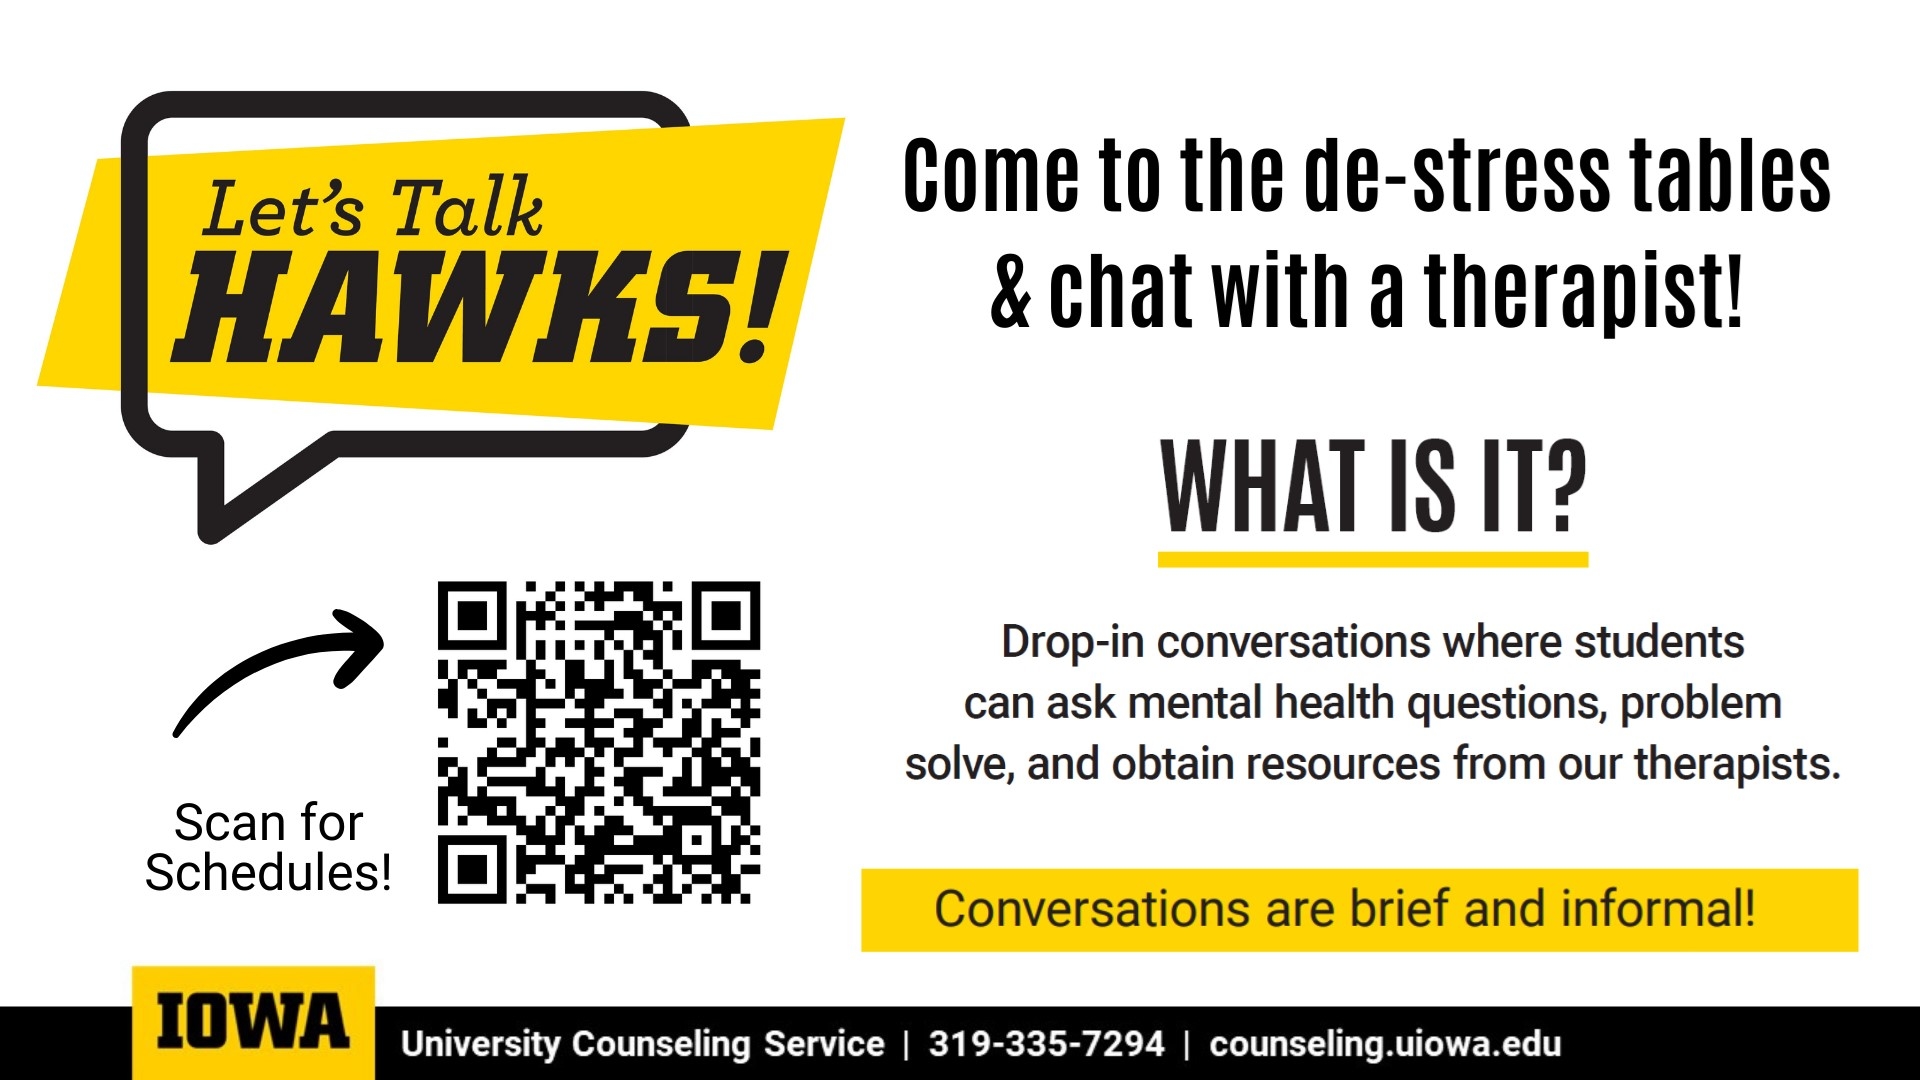 Let's Talk Hawks. Com to the de-stress tables & chat with a therapist. Drop in for brief and informal conversations. https://counseling.uiowa.edu/programs/lets-talk-hawks